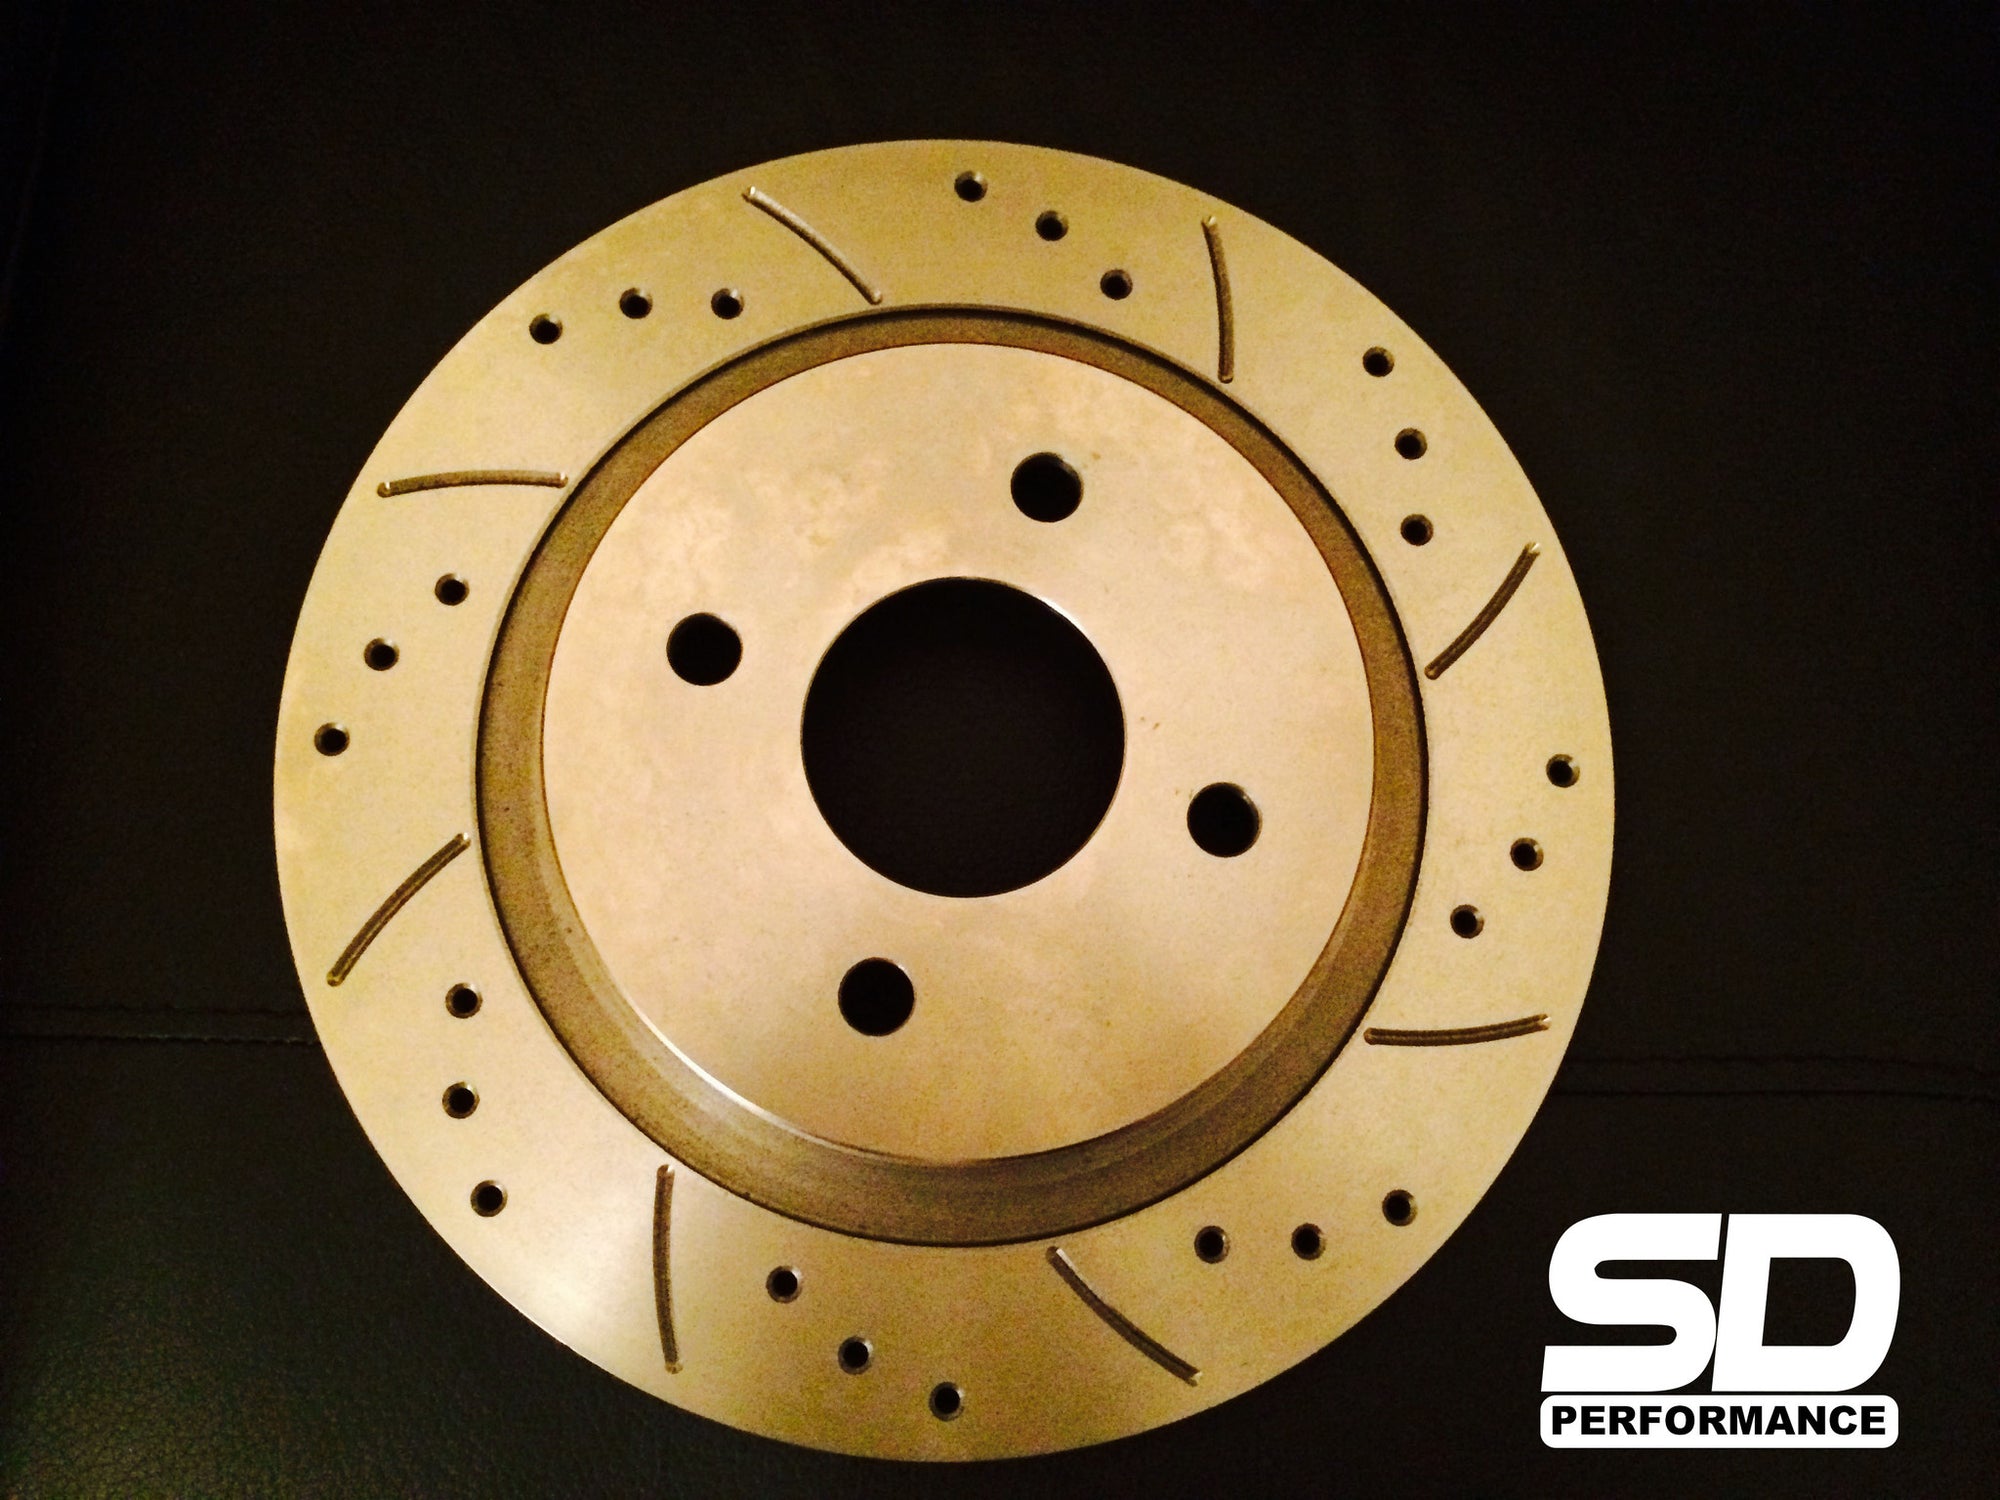 SD Performance Fiesta MK6 280mm rear conversion Performance discs - Drilled and Grooved